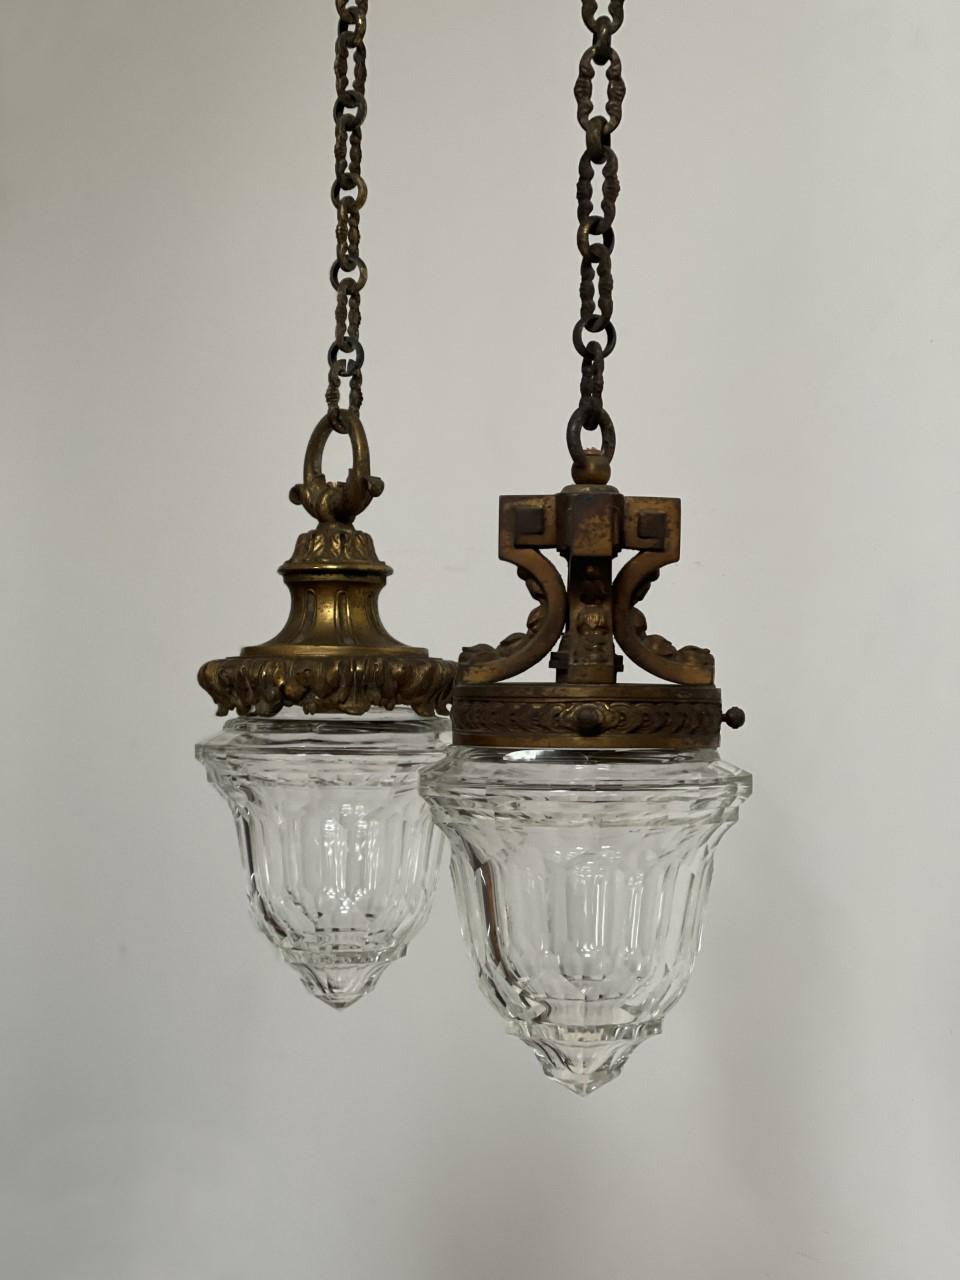 - A wonderful pair of antique cut glass pendants with original aged brass galleries, chain and ceiling roses, English circa 1910.
- The cut glass shades are identical across each of the designs, remarkable condition and unusual in form, they work